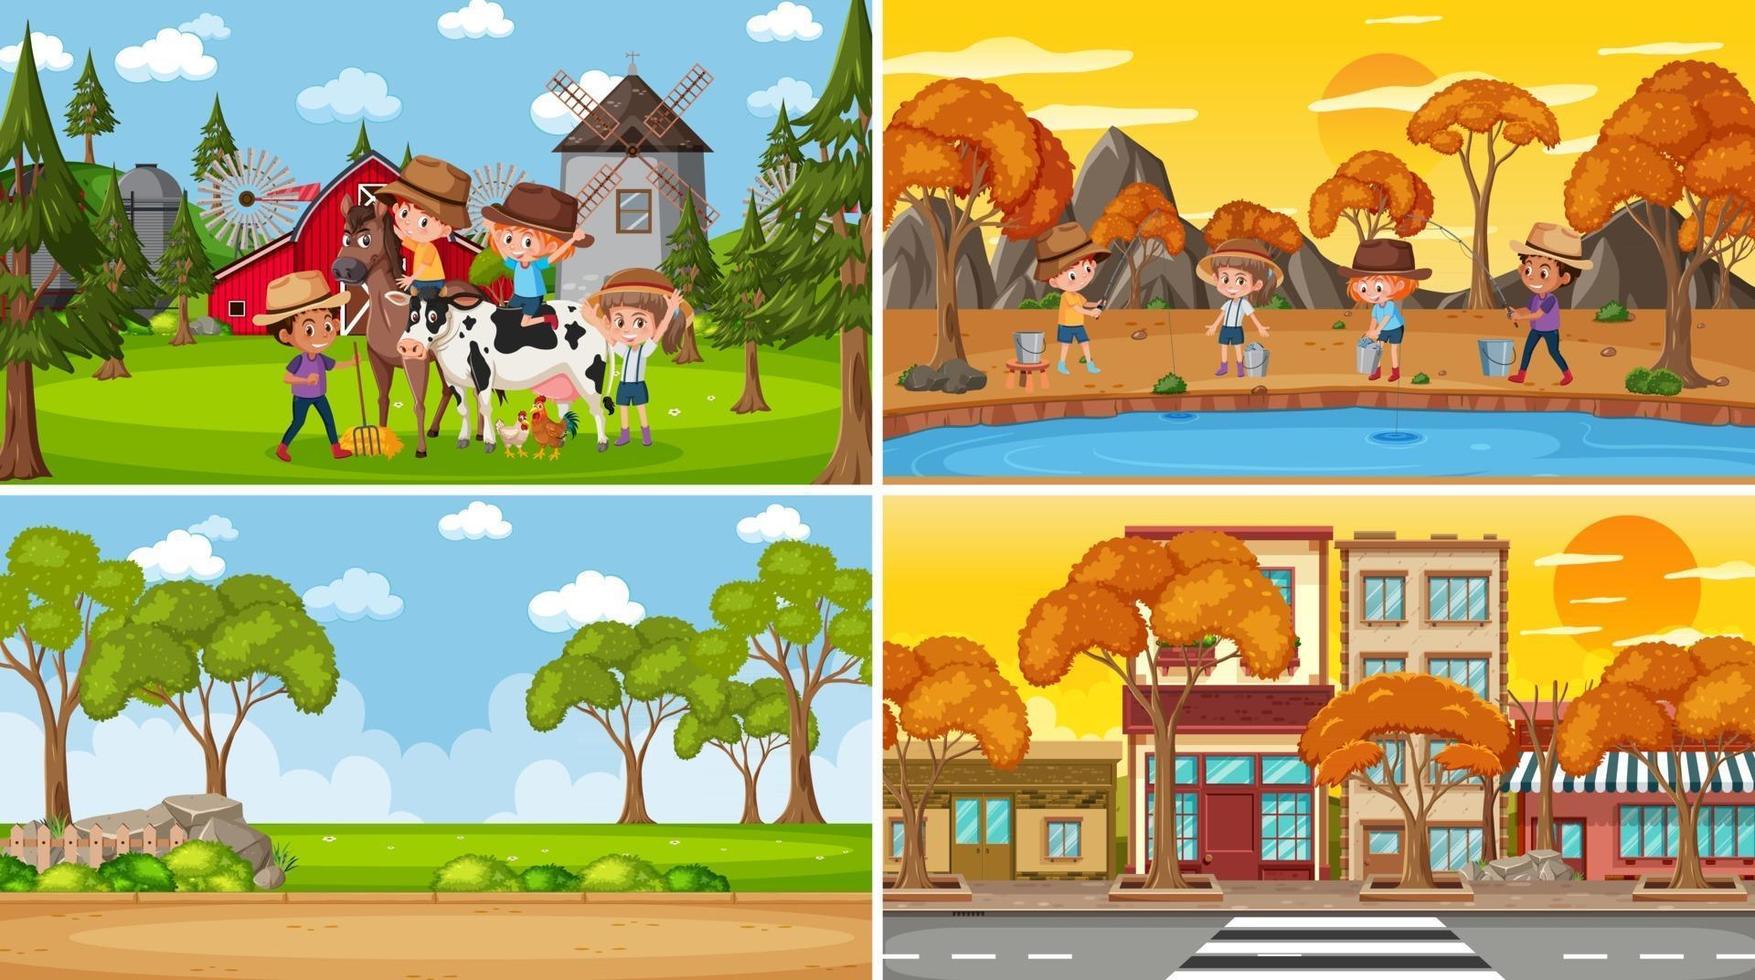 Four different scenes with children cartoon character vector